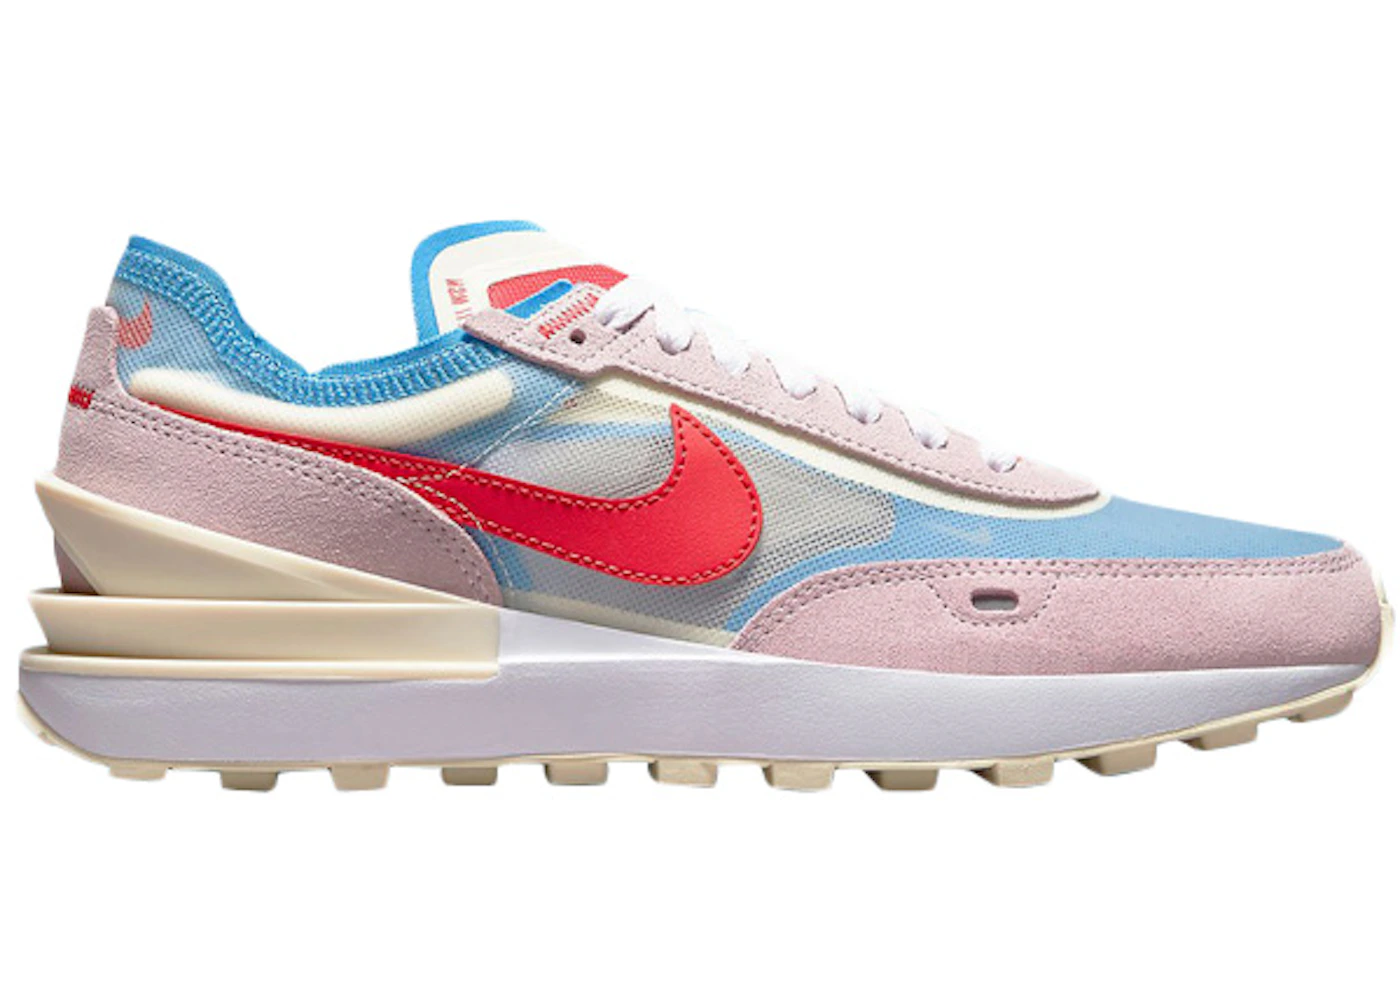 Nike Waffle One Pink Red Blue (Women's) - DN5057-600 - US